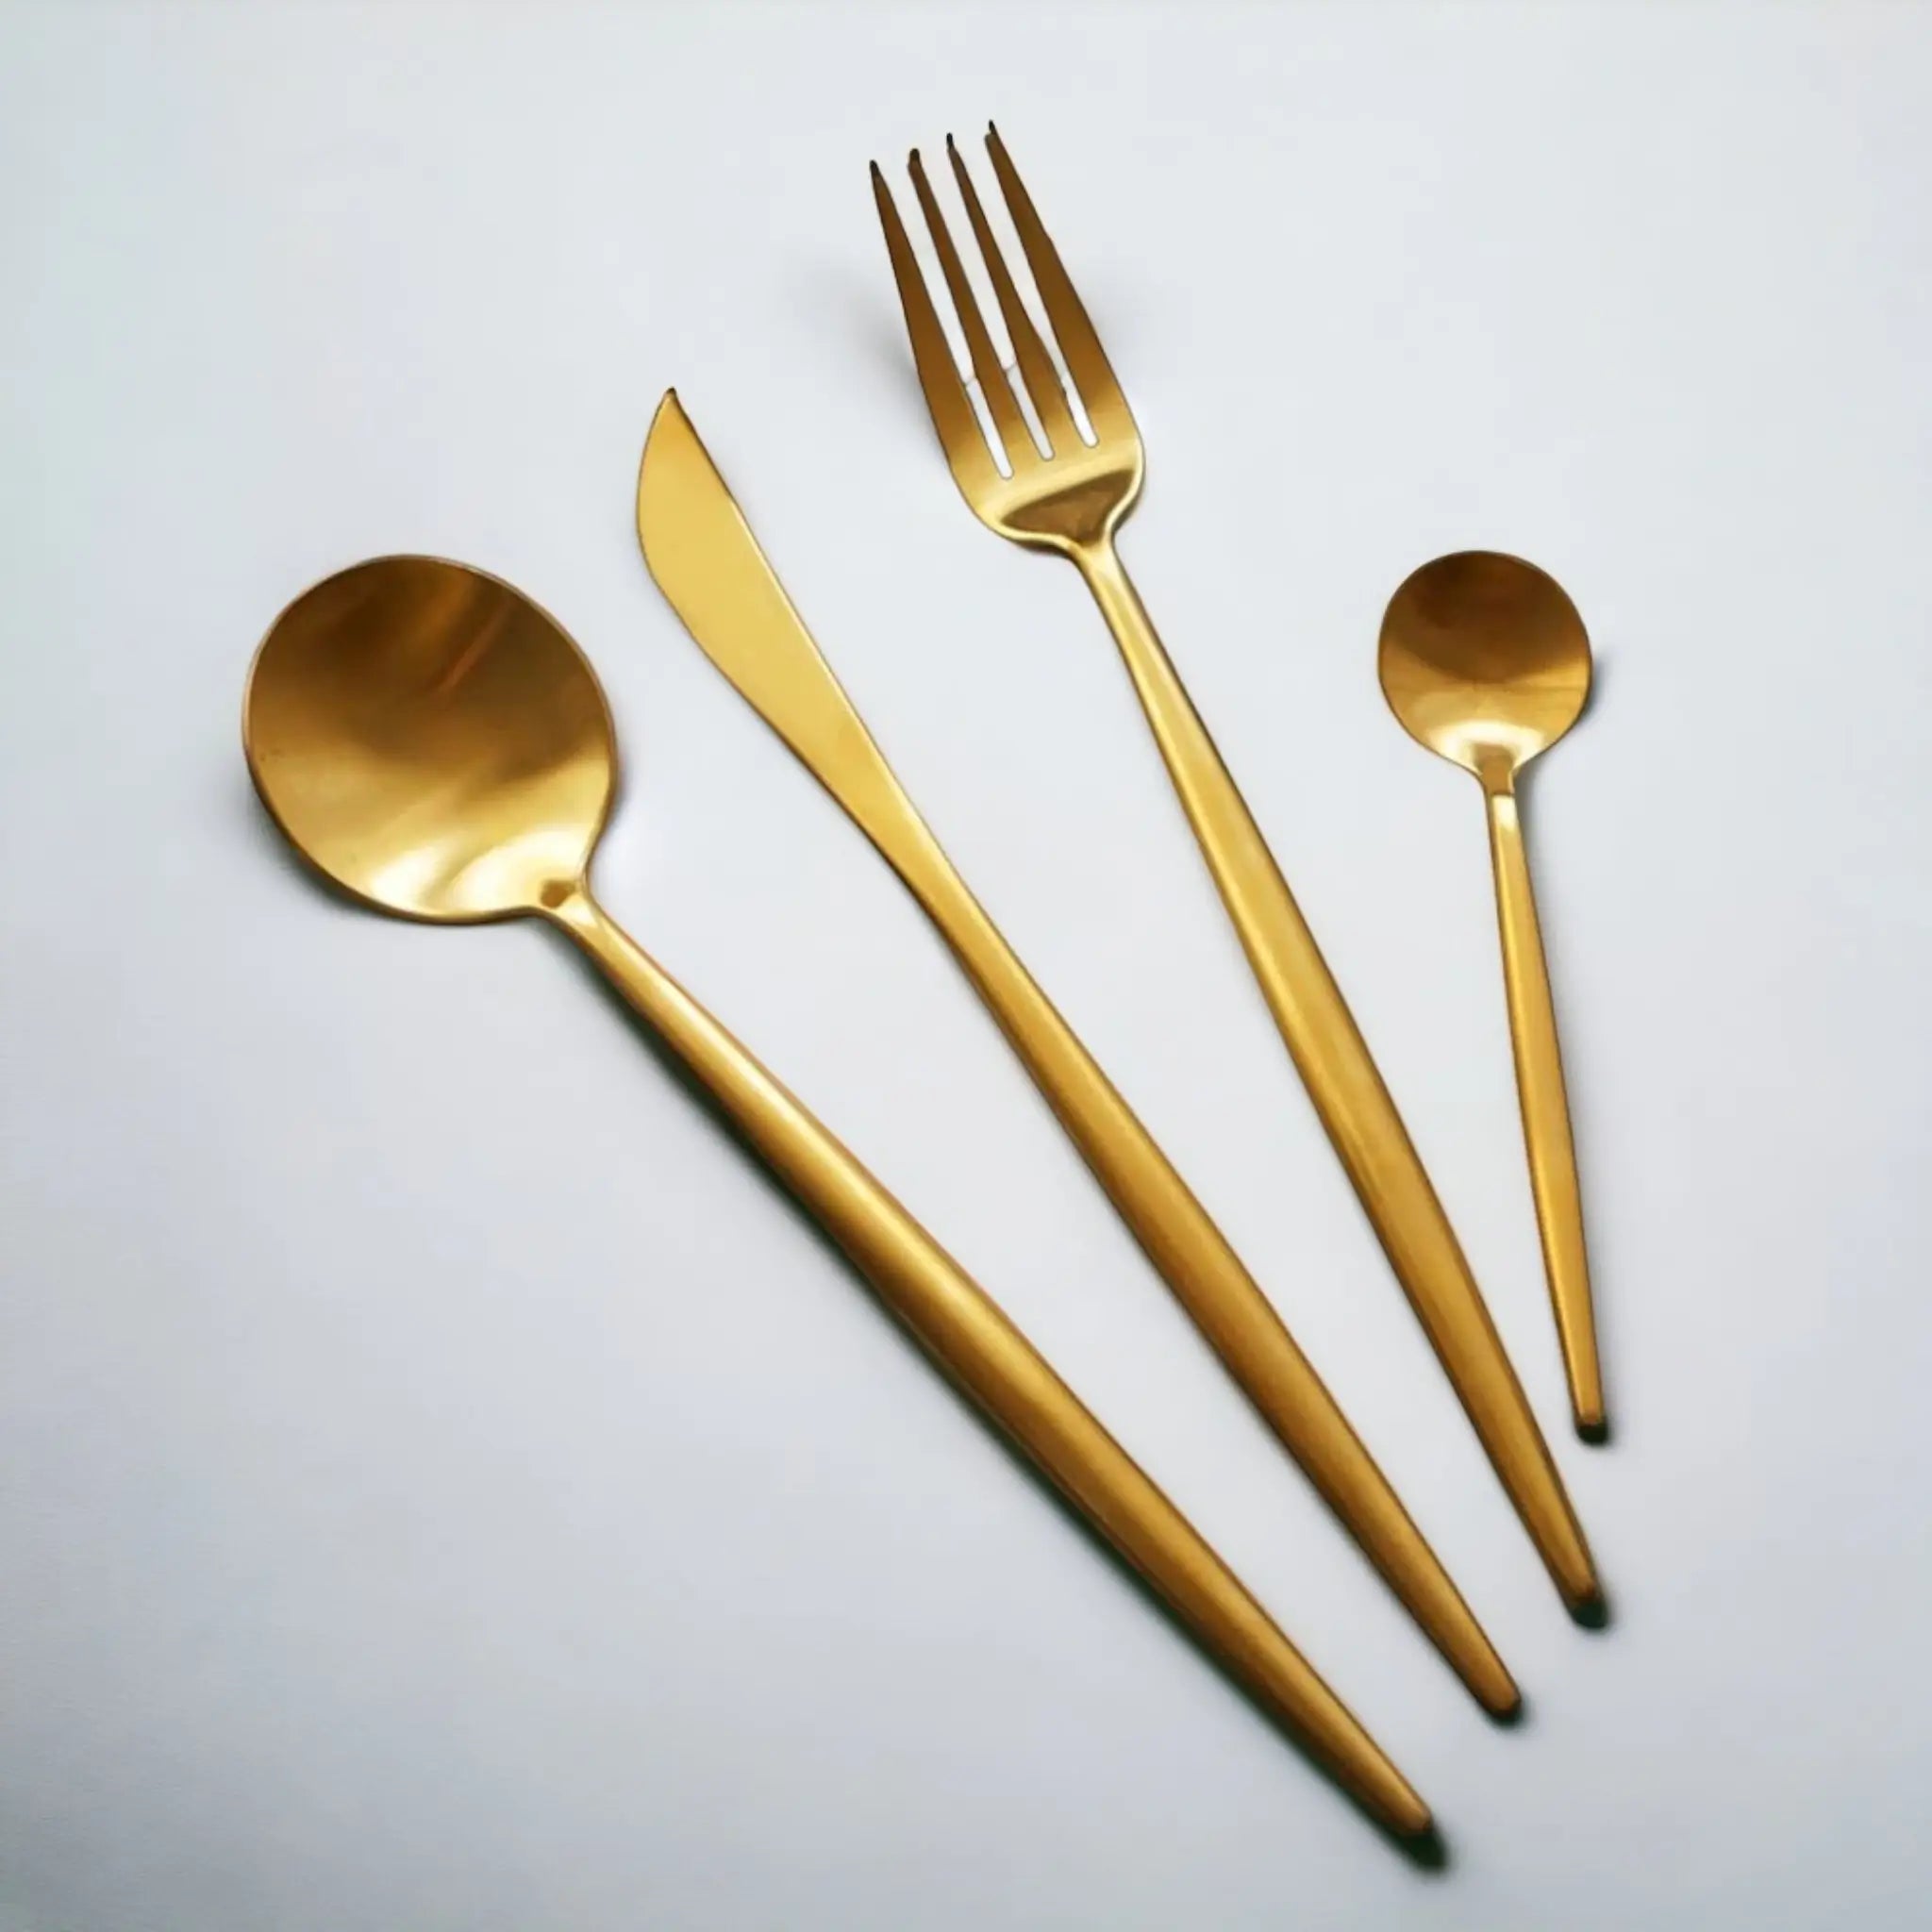 What is minimalist cutlery and why does it hold so much appeal?